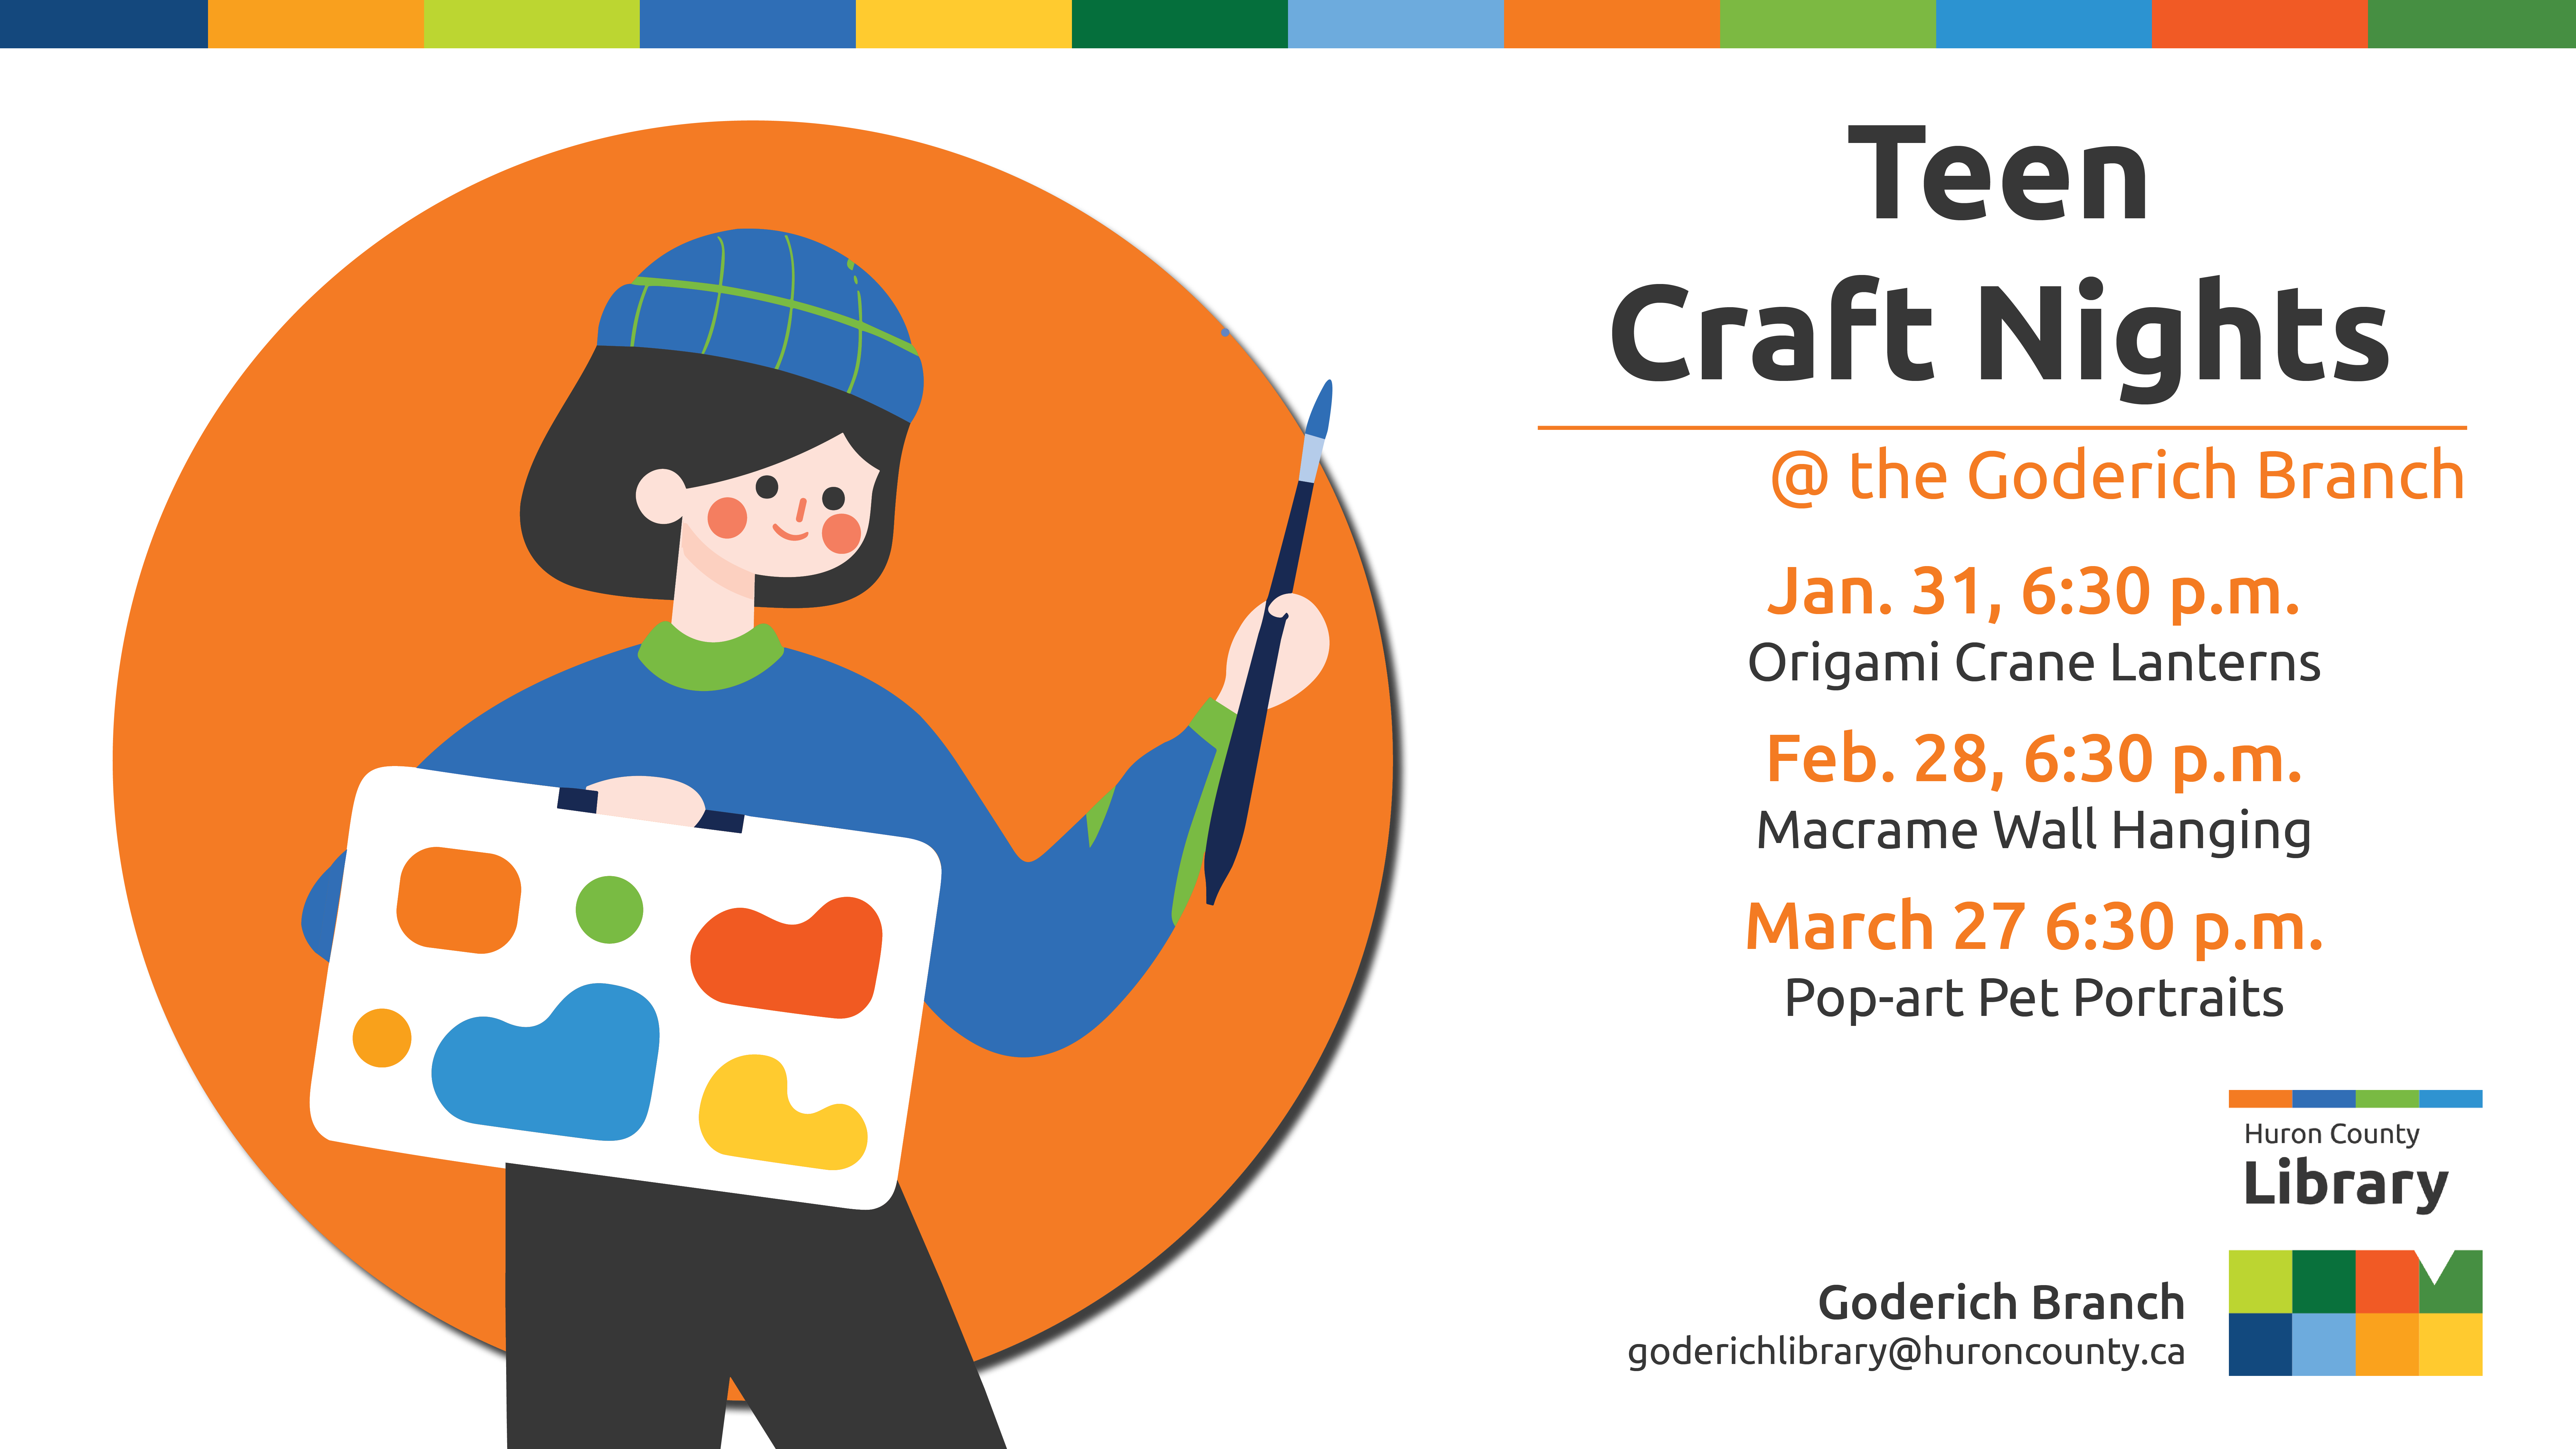 Illustration of a person holding a paint brush and paint pallet with text promoting teen craft nights at Goderich branch